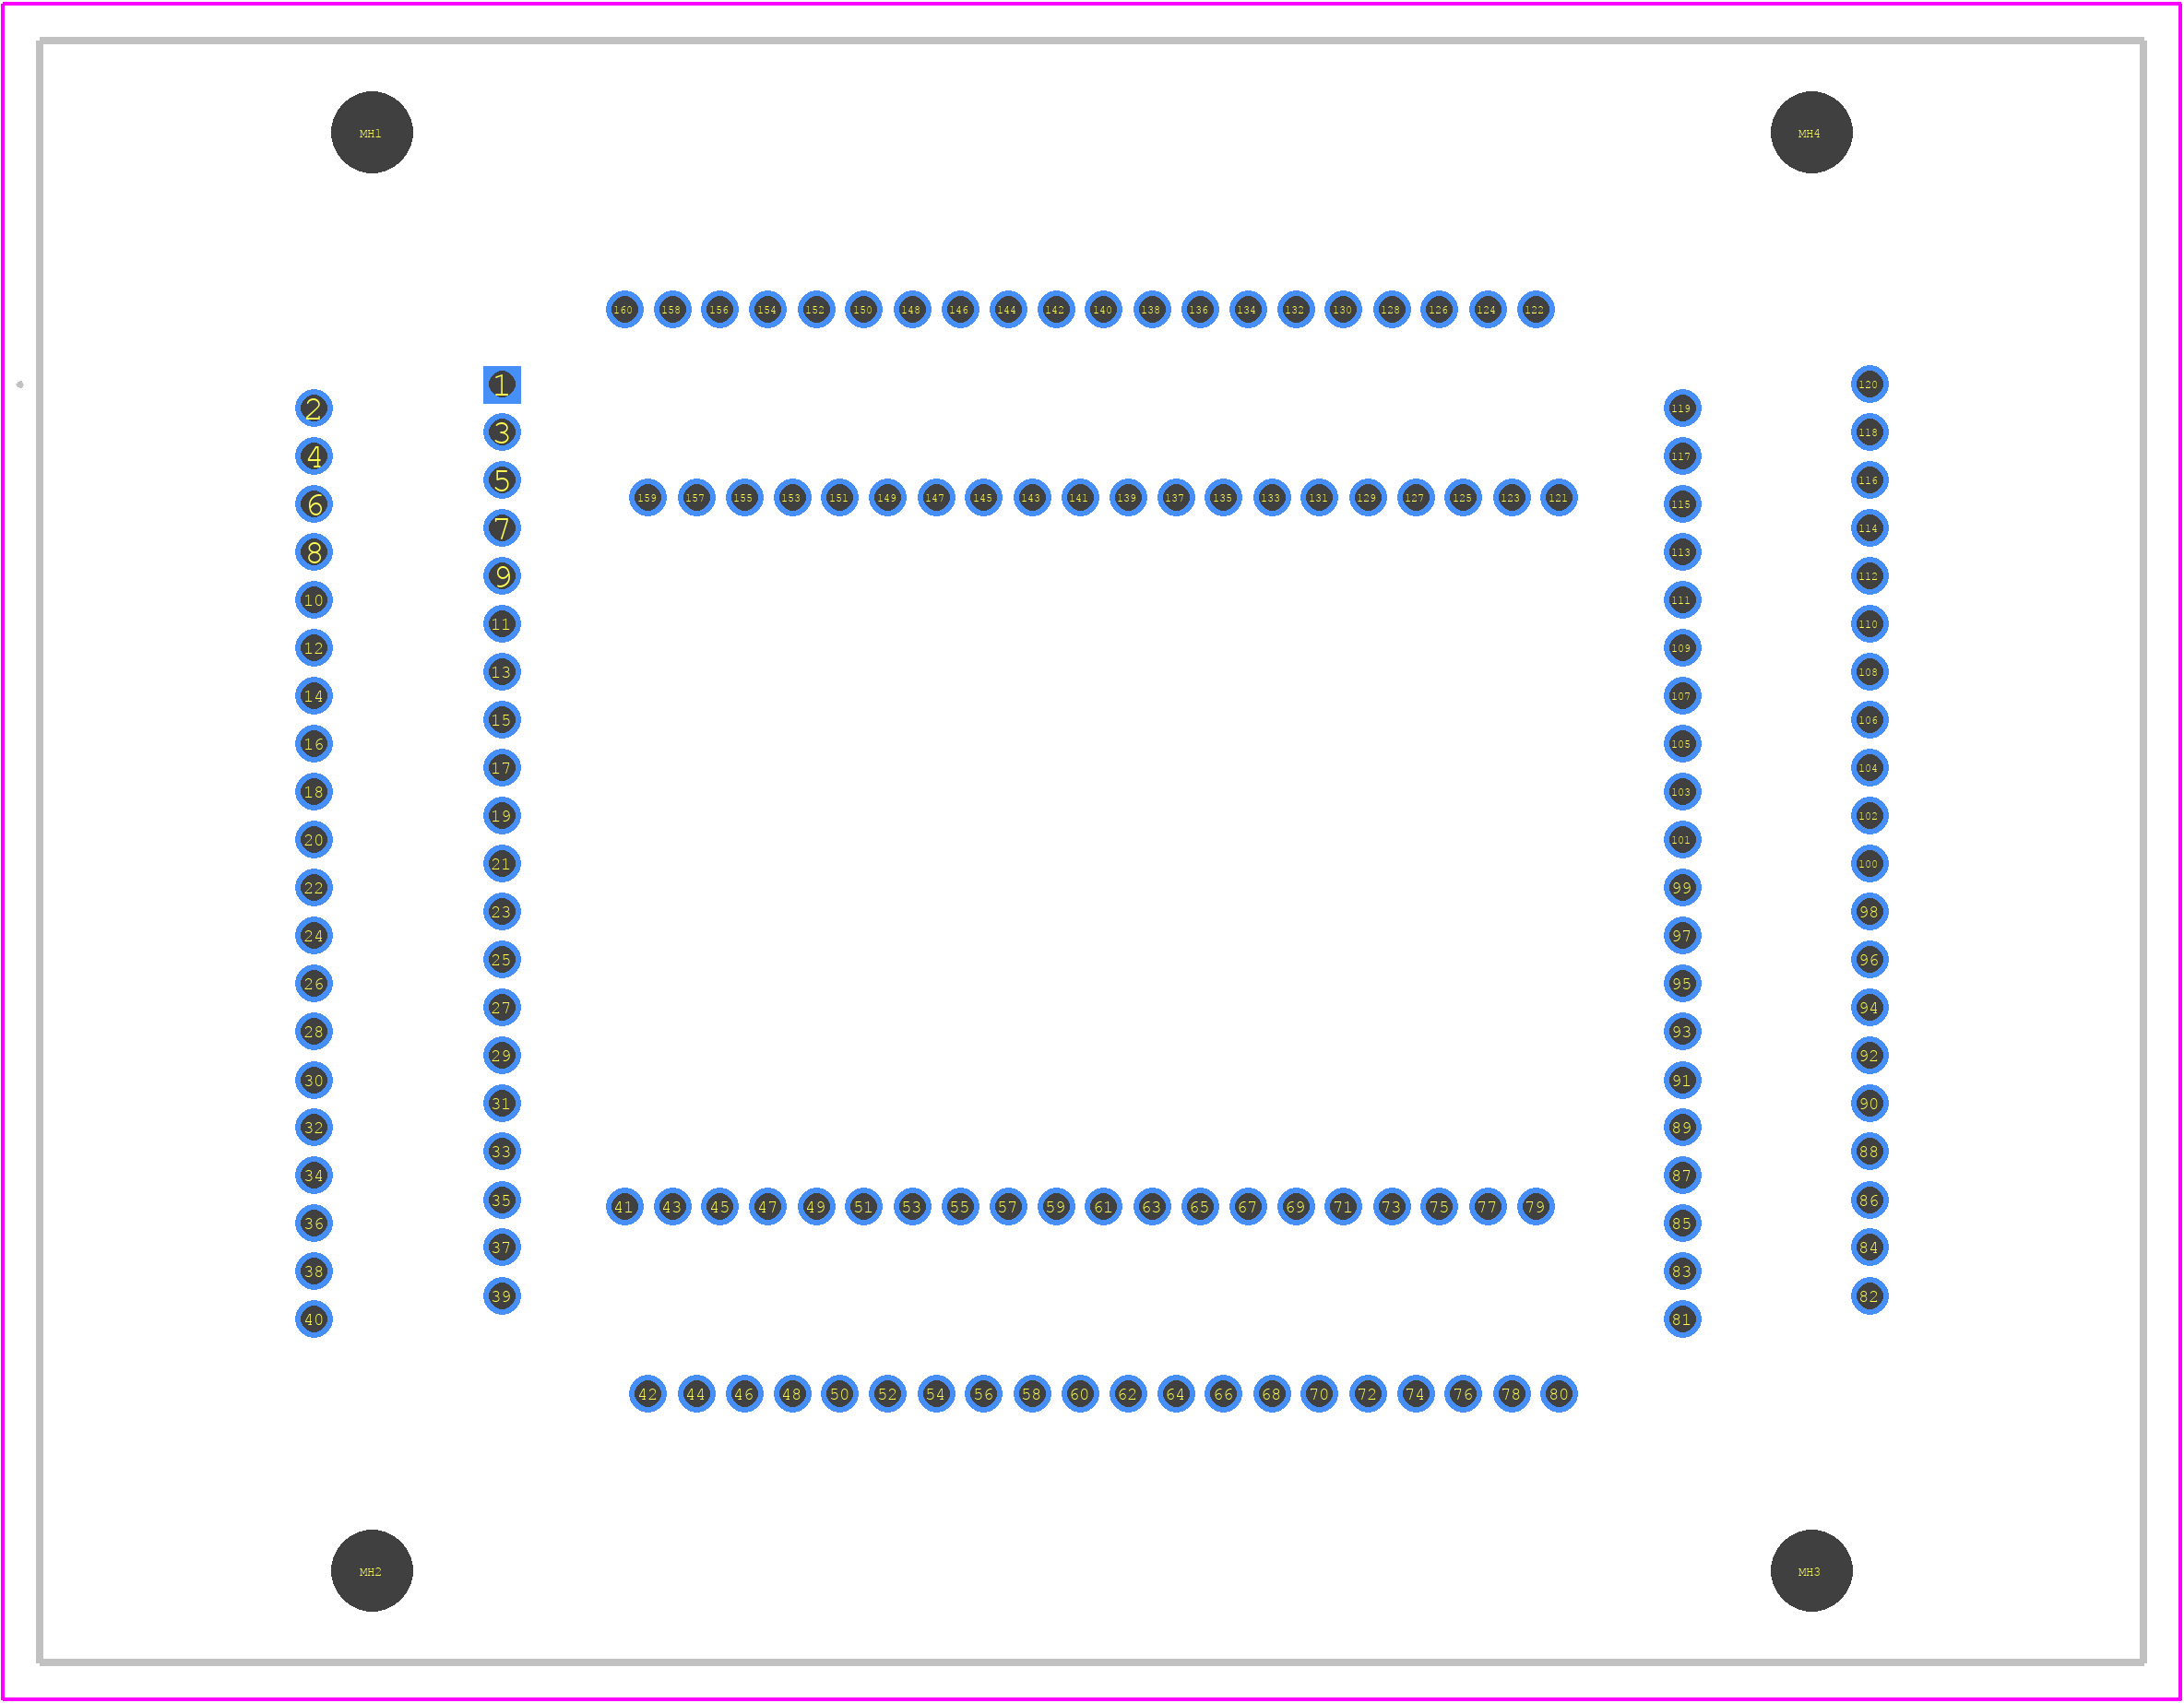 IC51-1604-845-4 - Yamaichi PCB footprint - Other - Other - IC51-1604-845-4-2